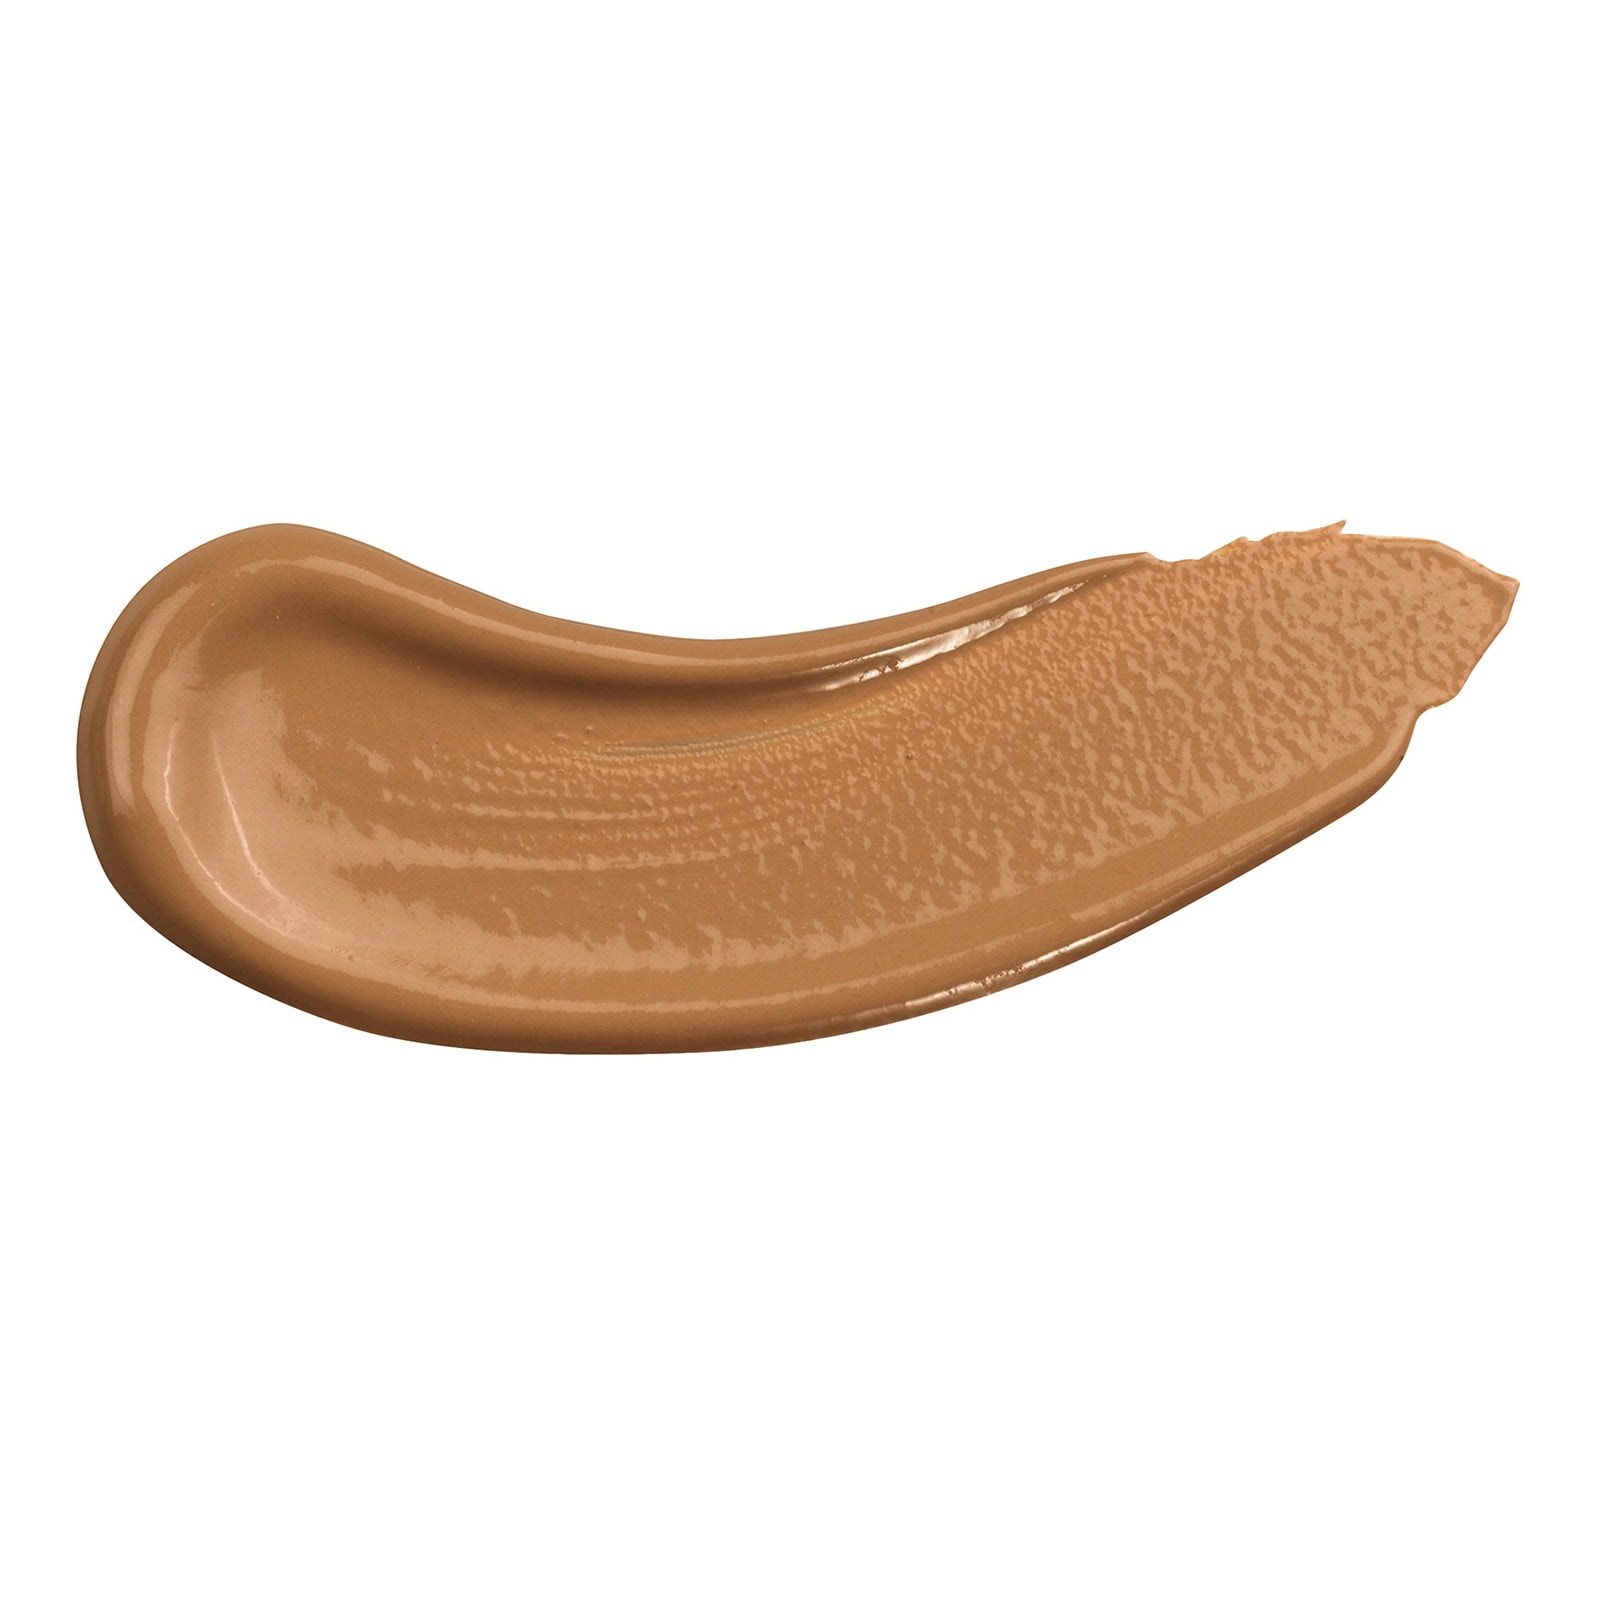 L.A. Girl P.R.O coverage foundation – Queen's Boutique and Beauty